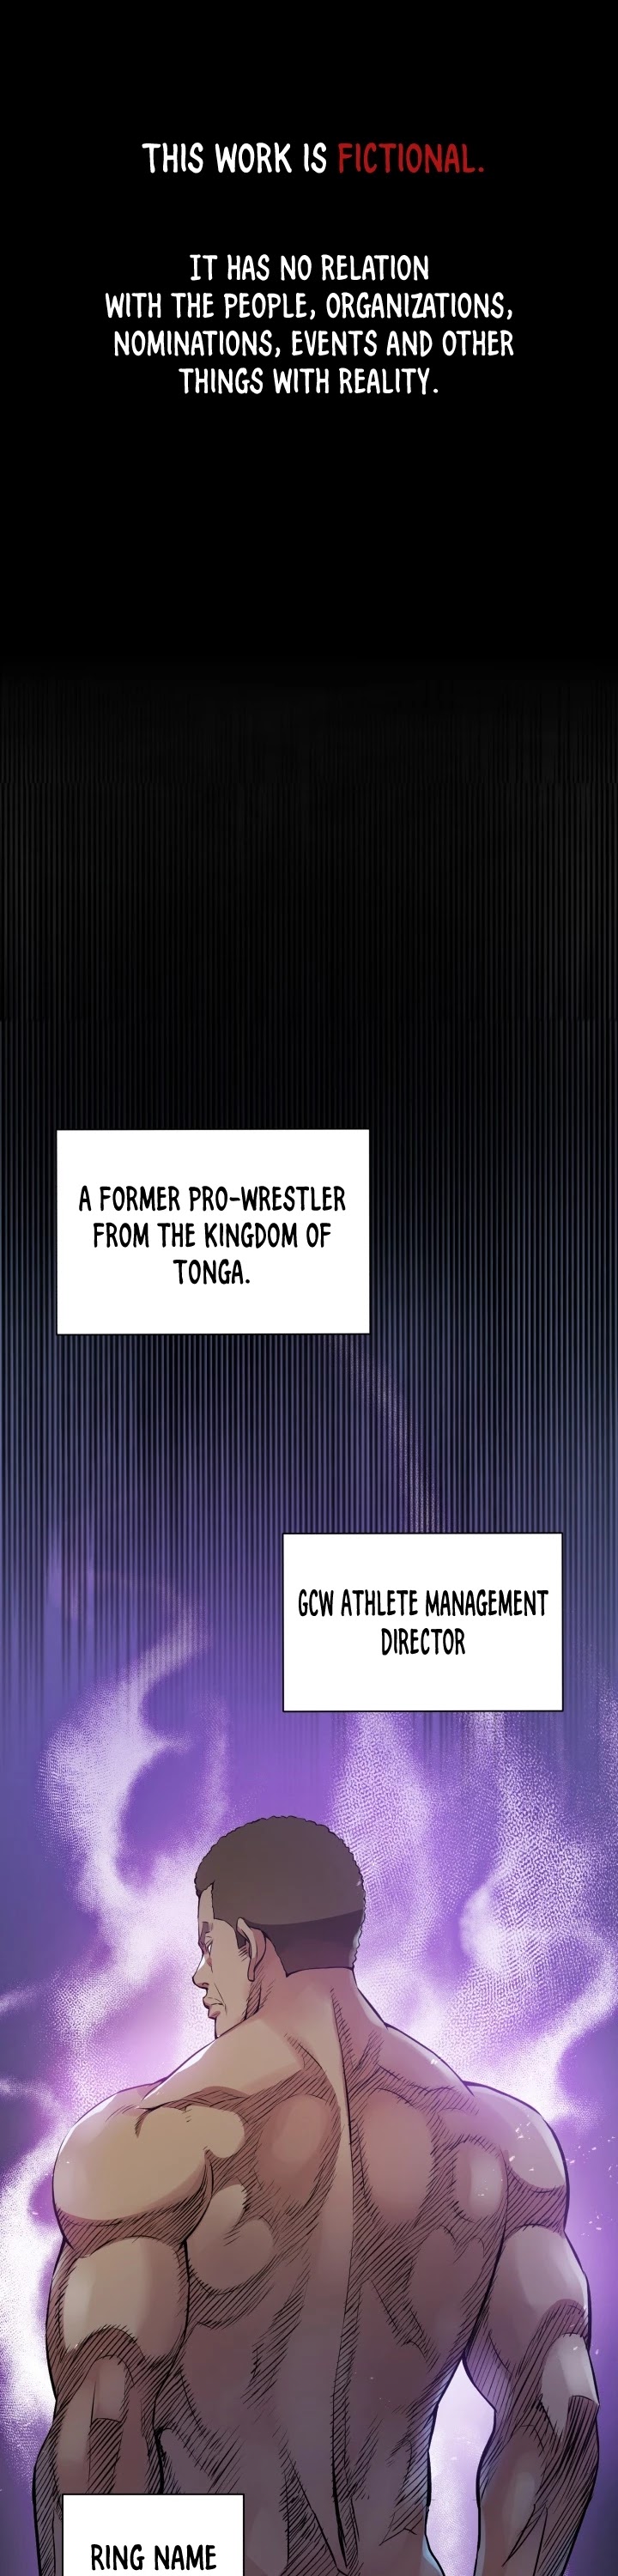 The God Of Pro Wrestling - Page 2